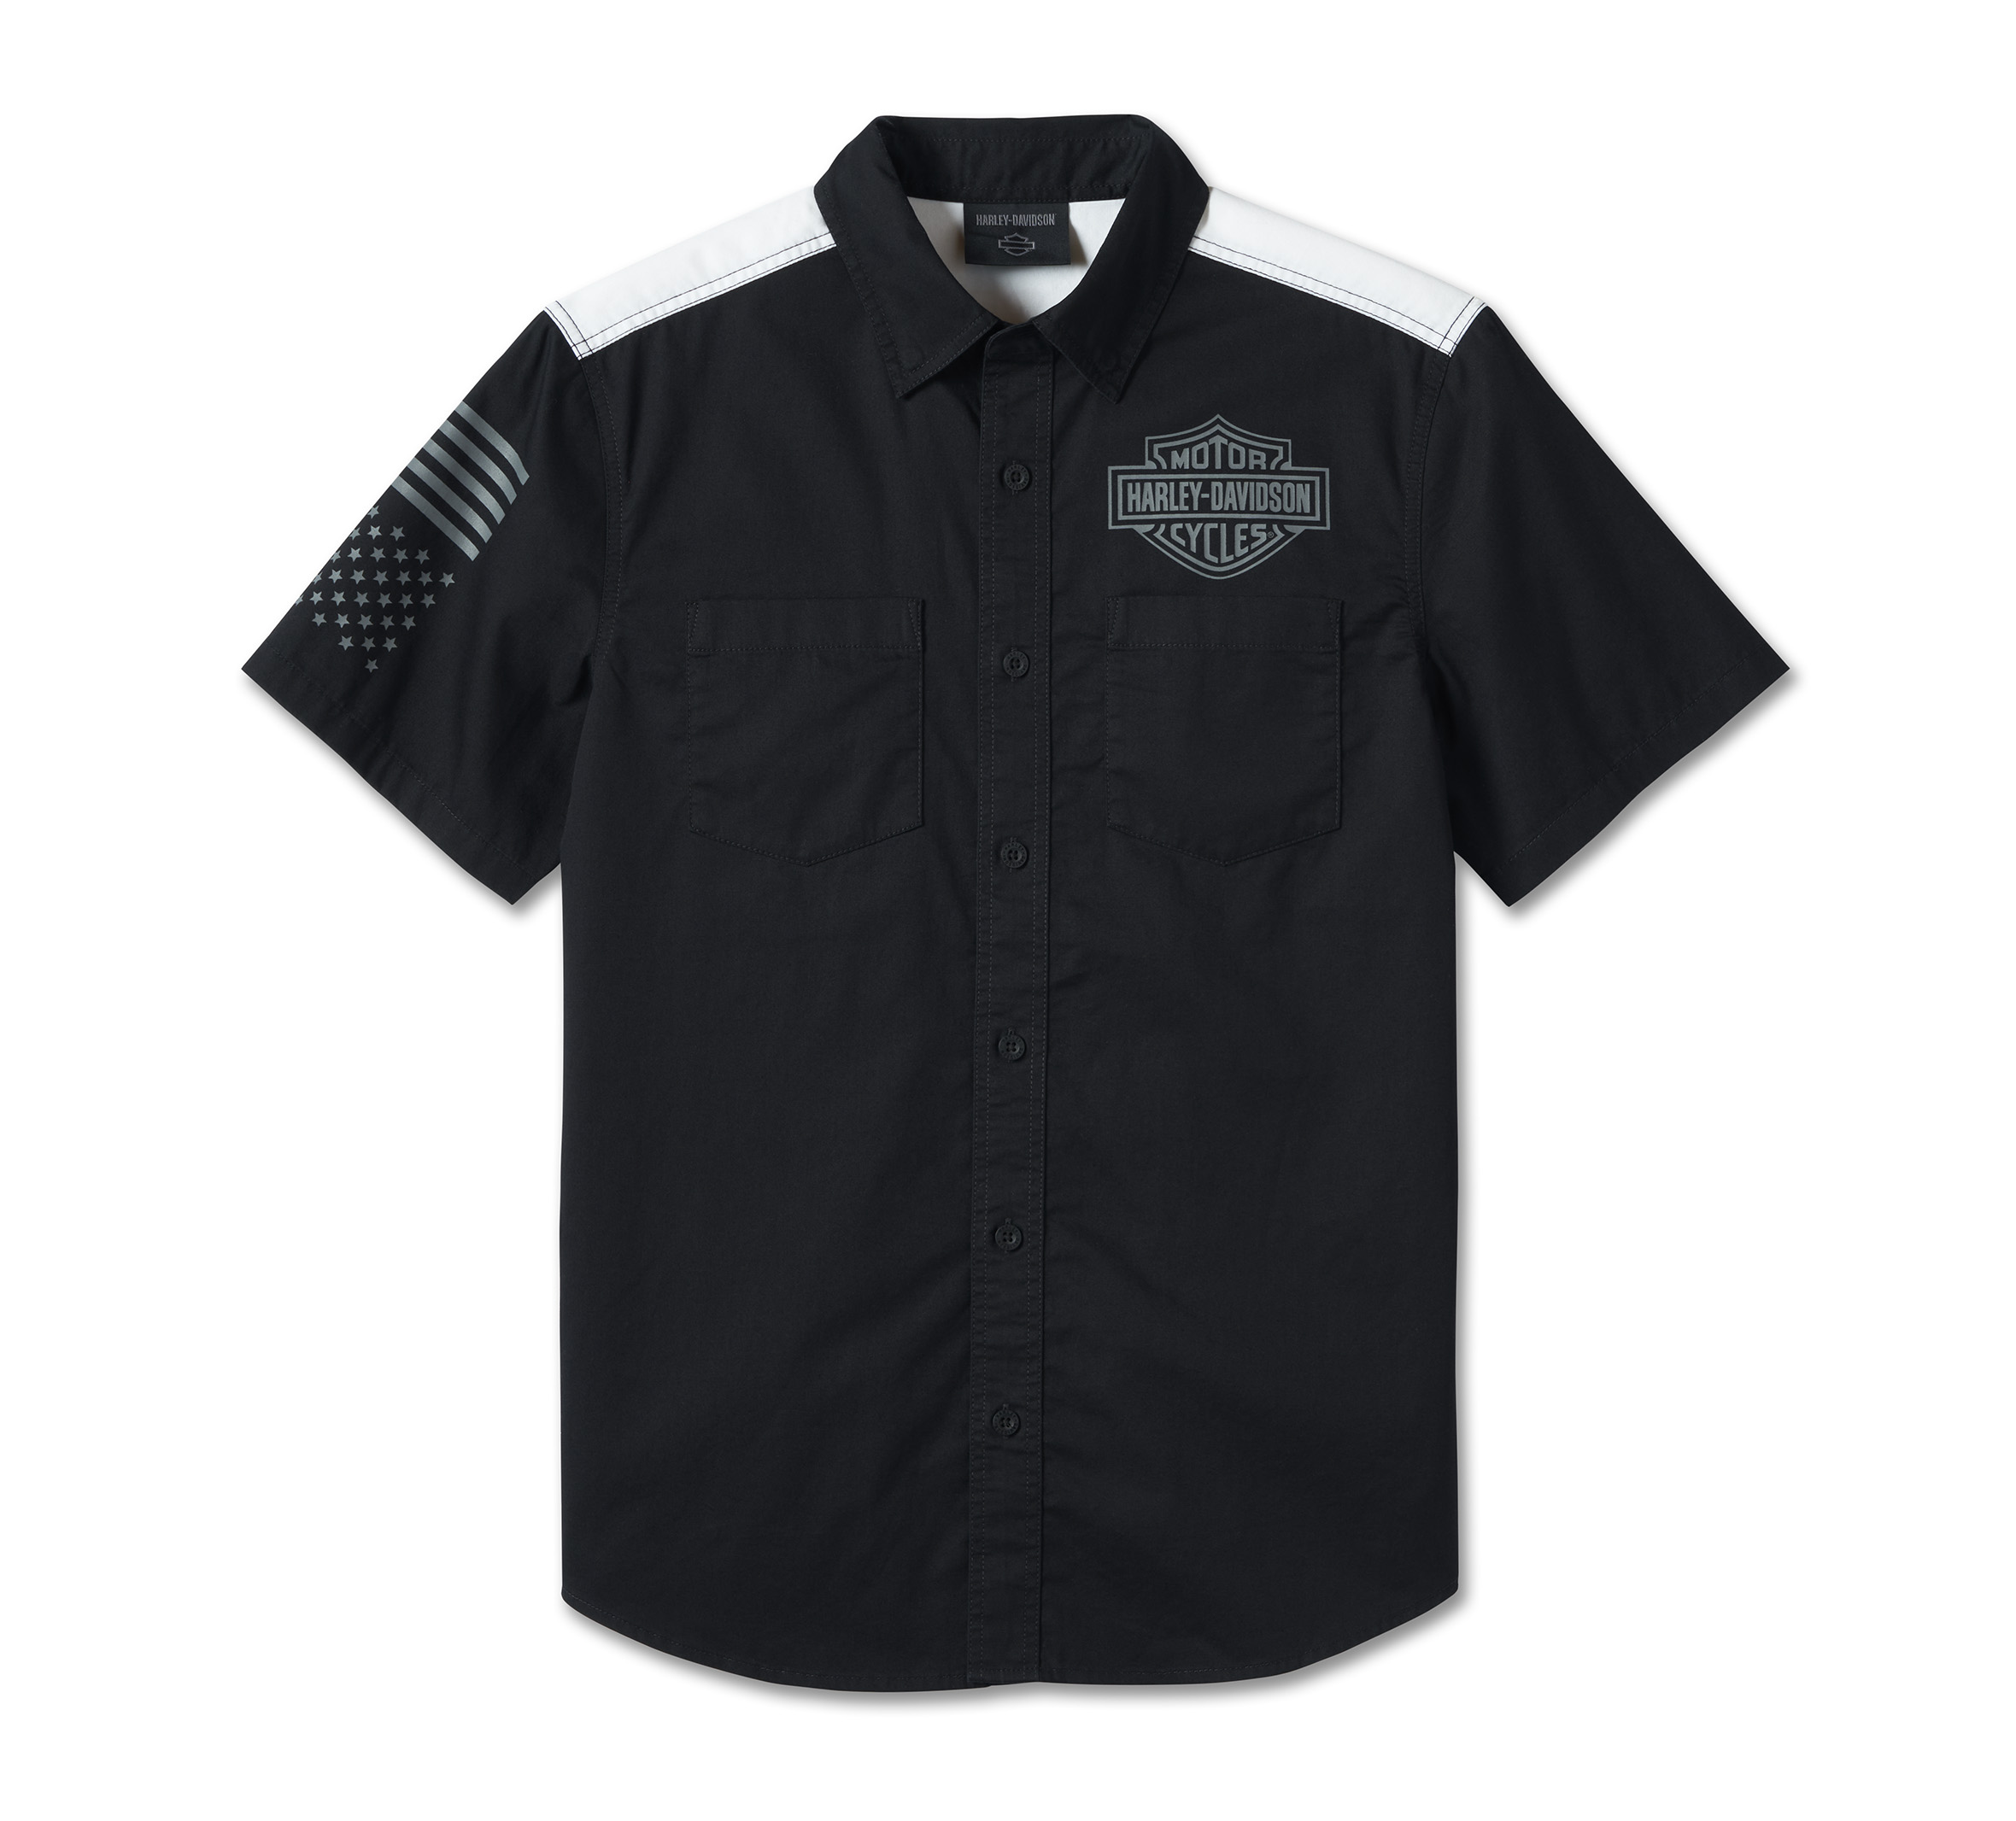 Men's Wounded Warrior Project Short Sleeve Shirt